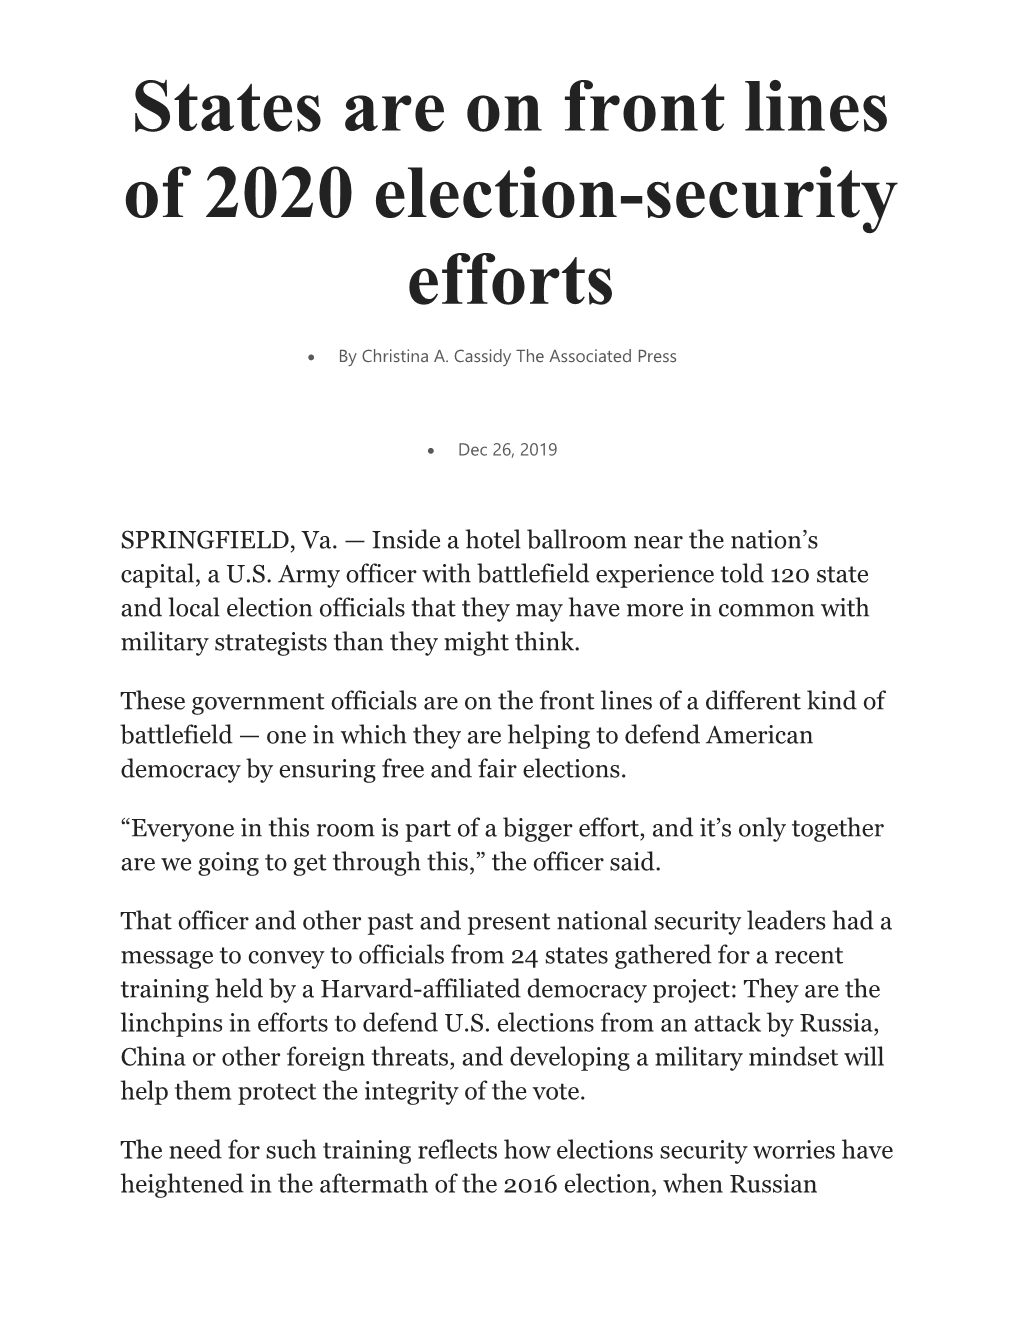 States Are on Front Lines of 2020 Election-Security Efforts